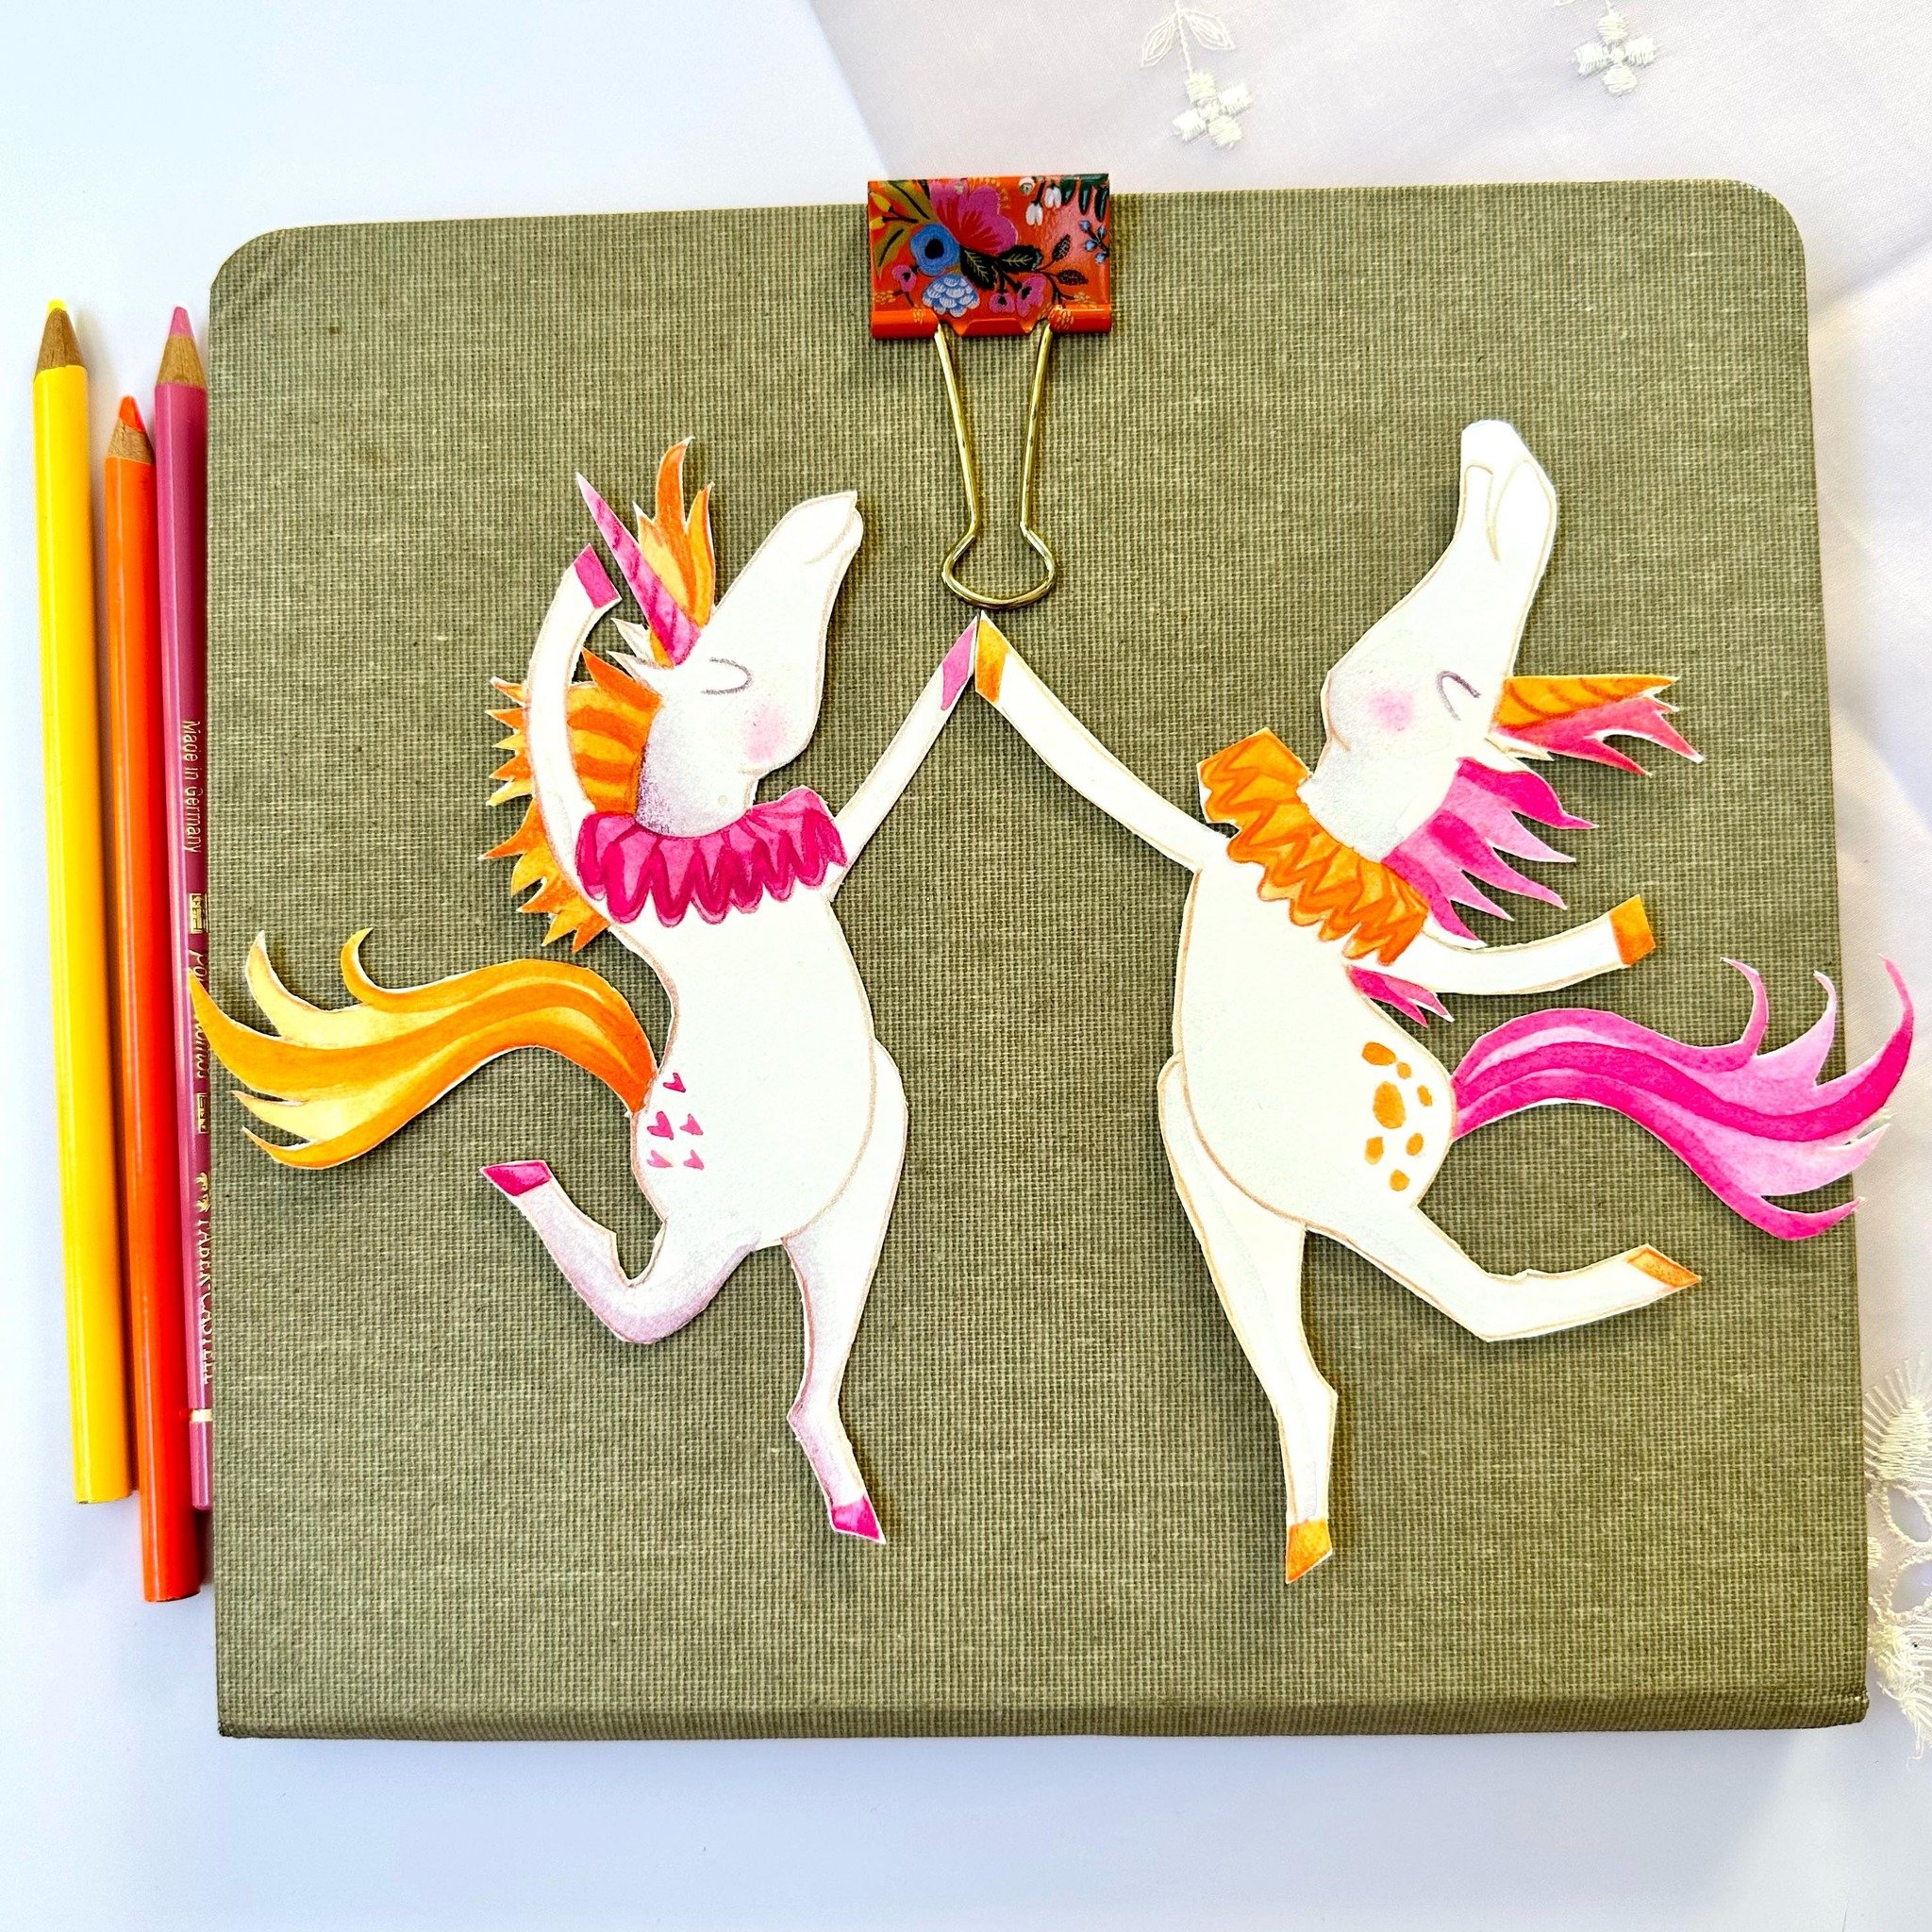 These little friends love to dance! The perfect way to warm up on this chilly day ⛅️ 
Is it just me or there something extra sweet about collage ? #australianillustrator #unicorn #collage